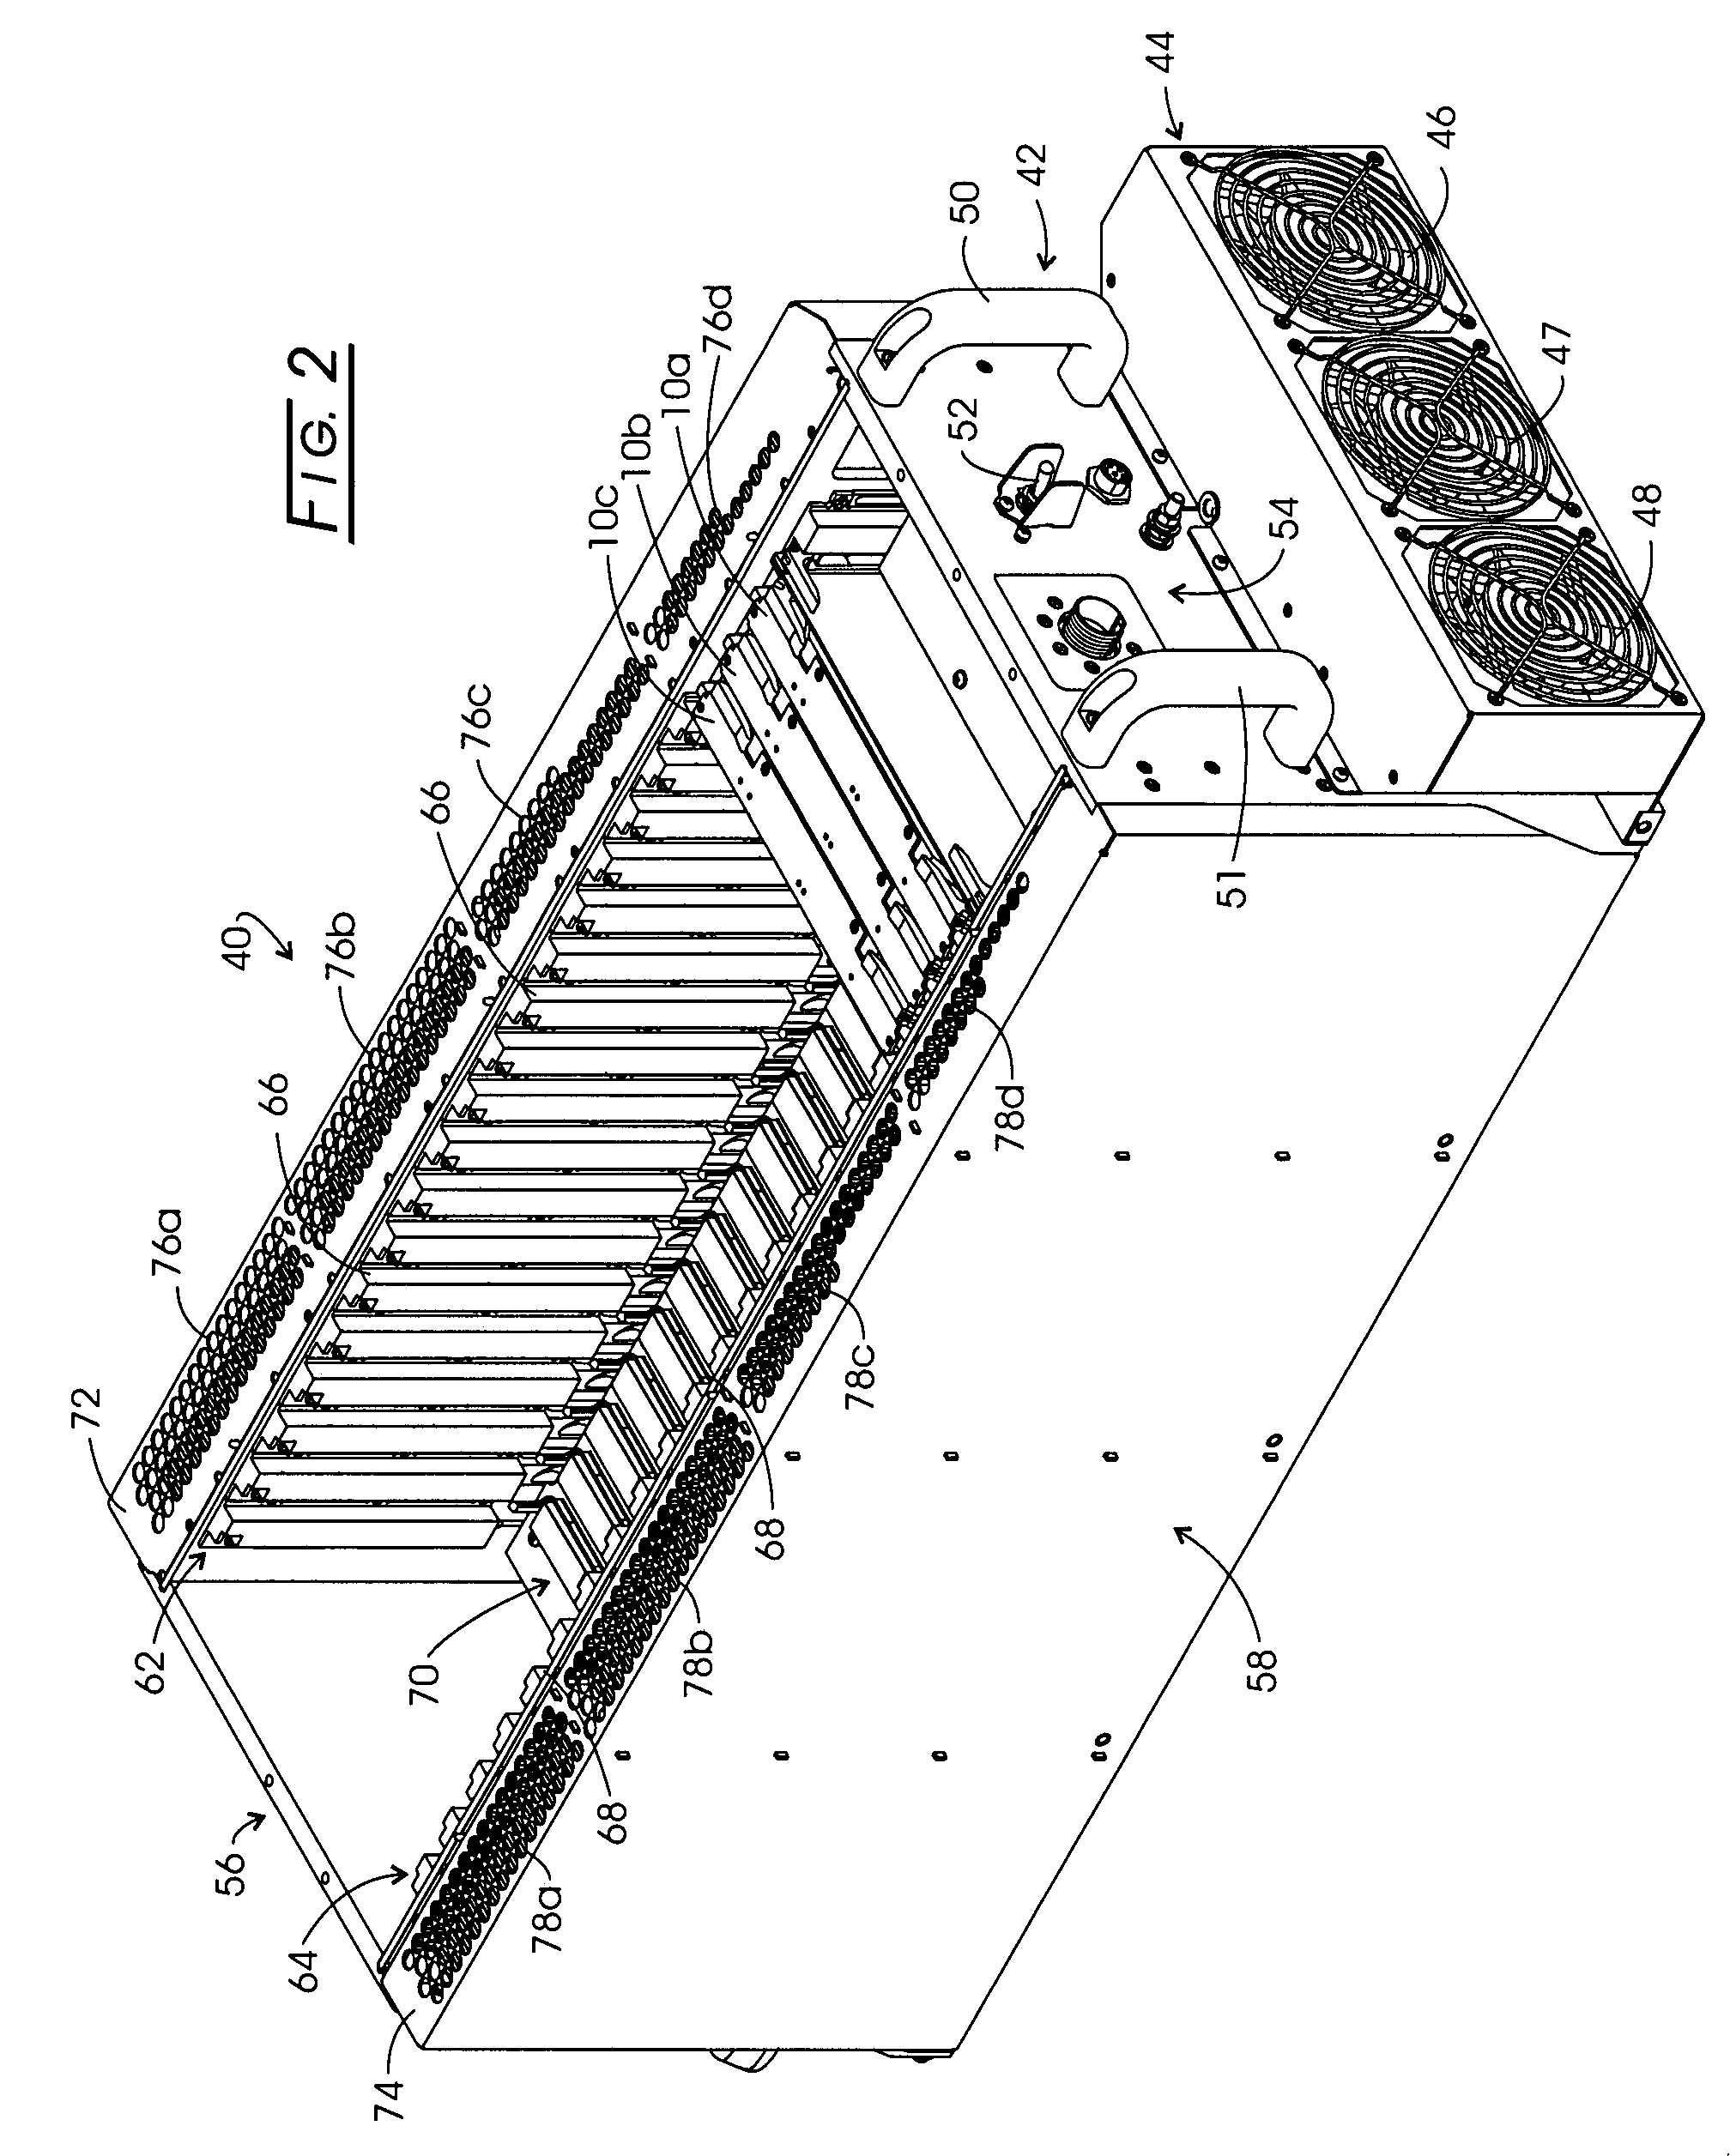 Method and system for dissipating thermal energy from conduction-cooled circuit card assemblies which employ remote heat sinks and heat pipe technology